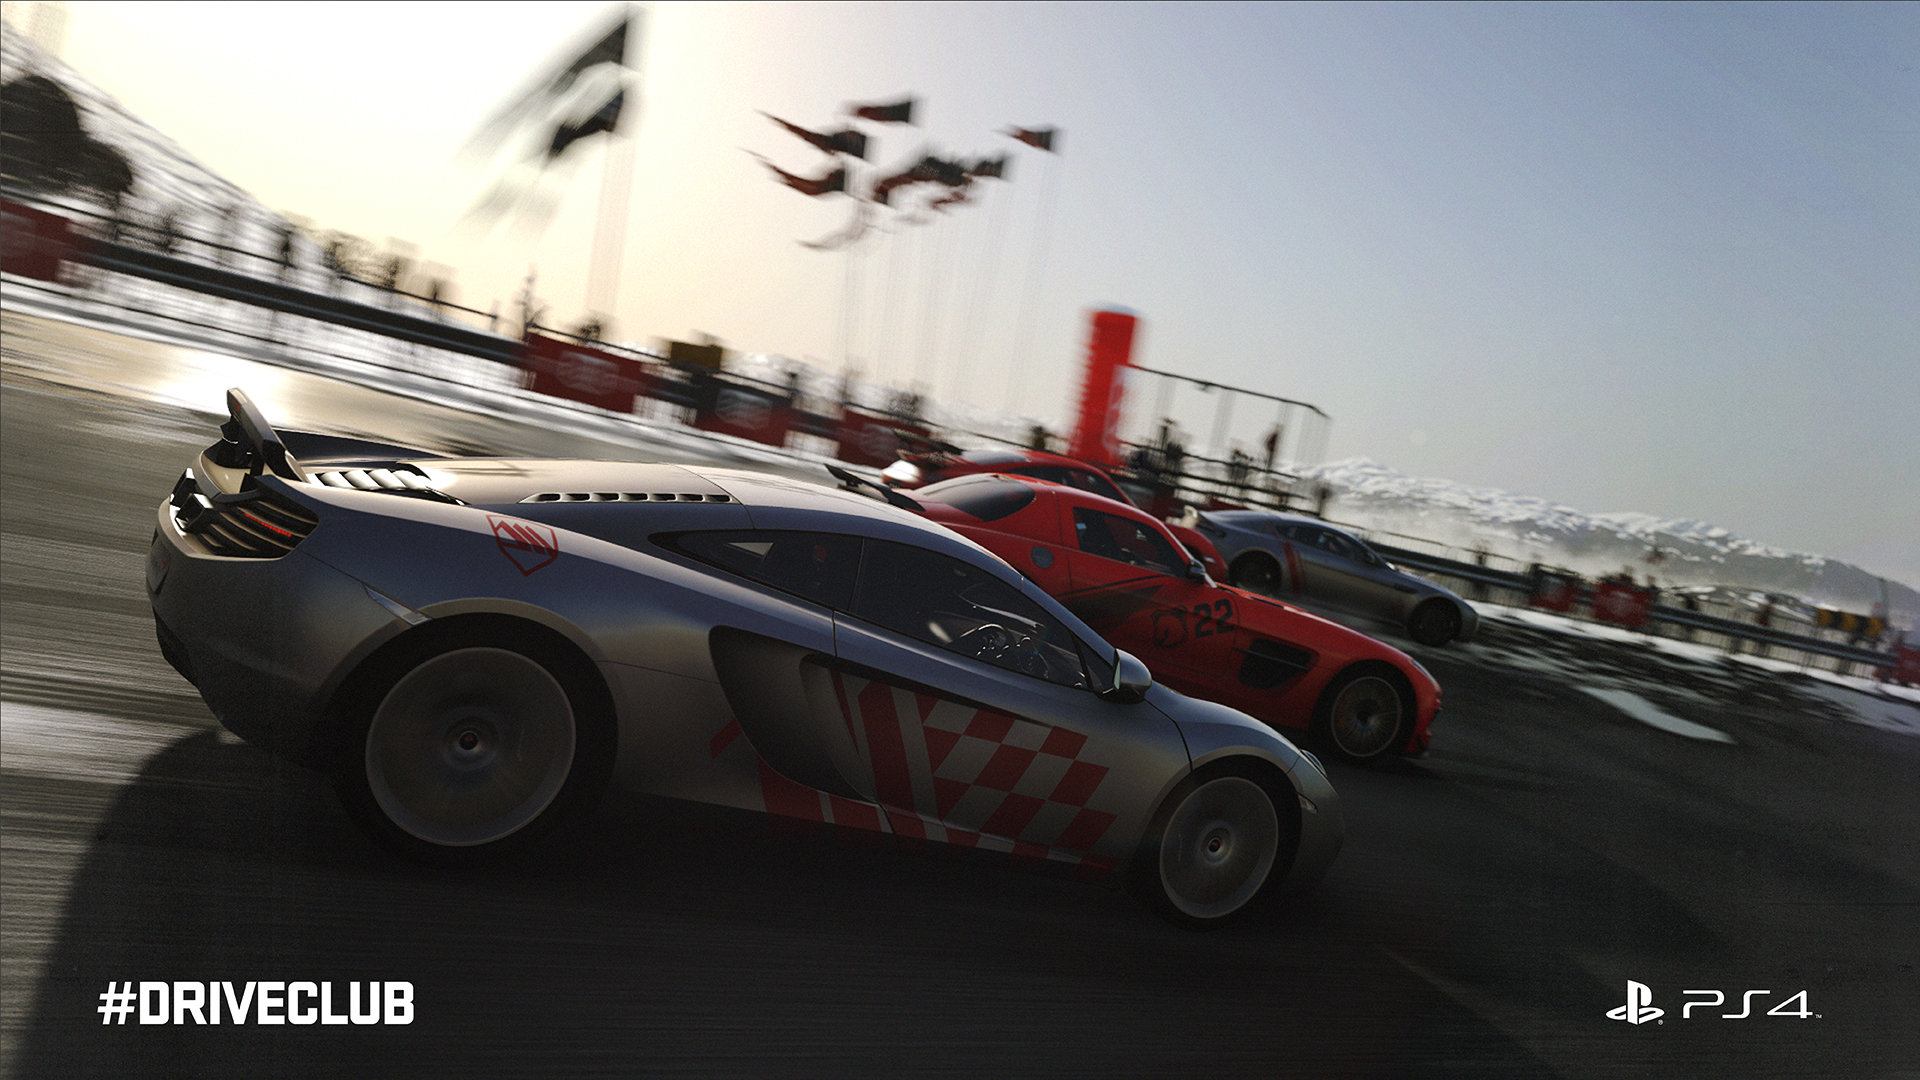 “Driveclub” Free for PS Plus Users Delayed